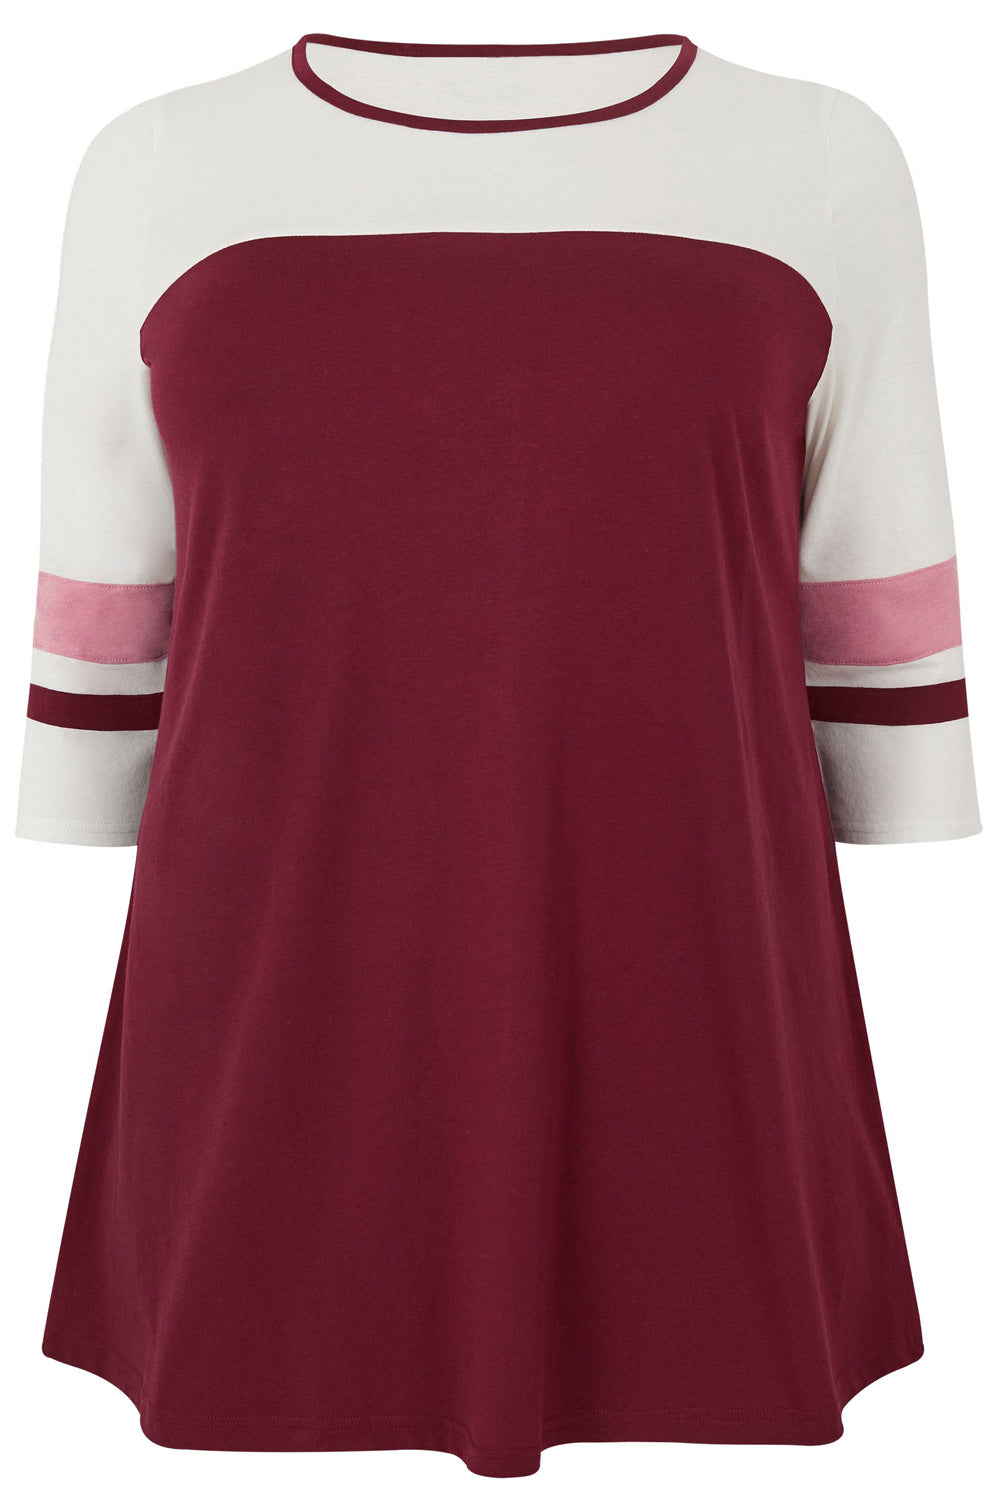 Wine Red Colorblock 3/4 Sleeve Plus Size Top